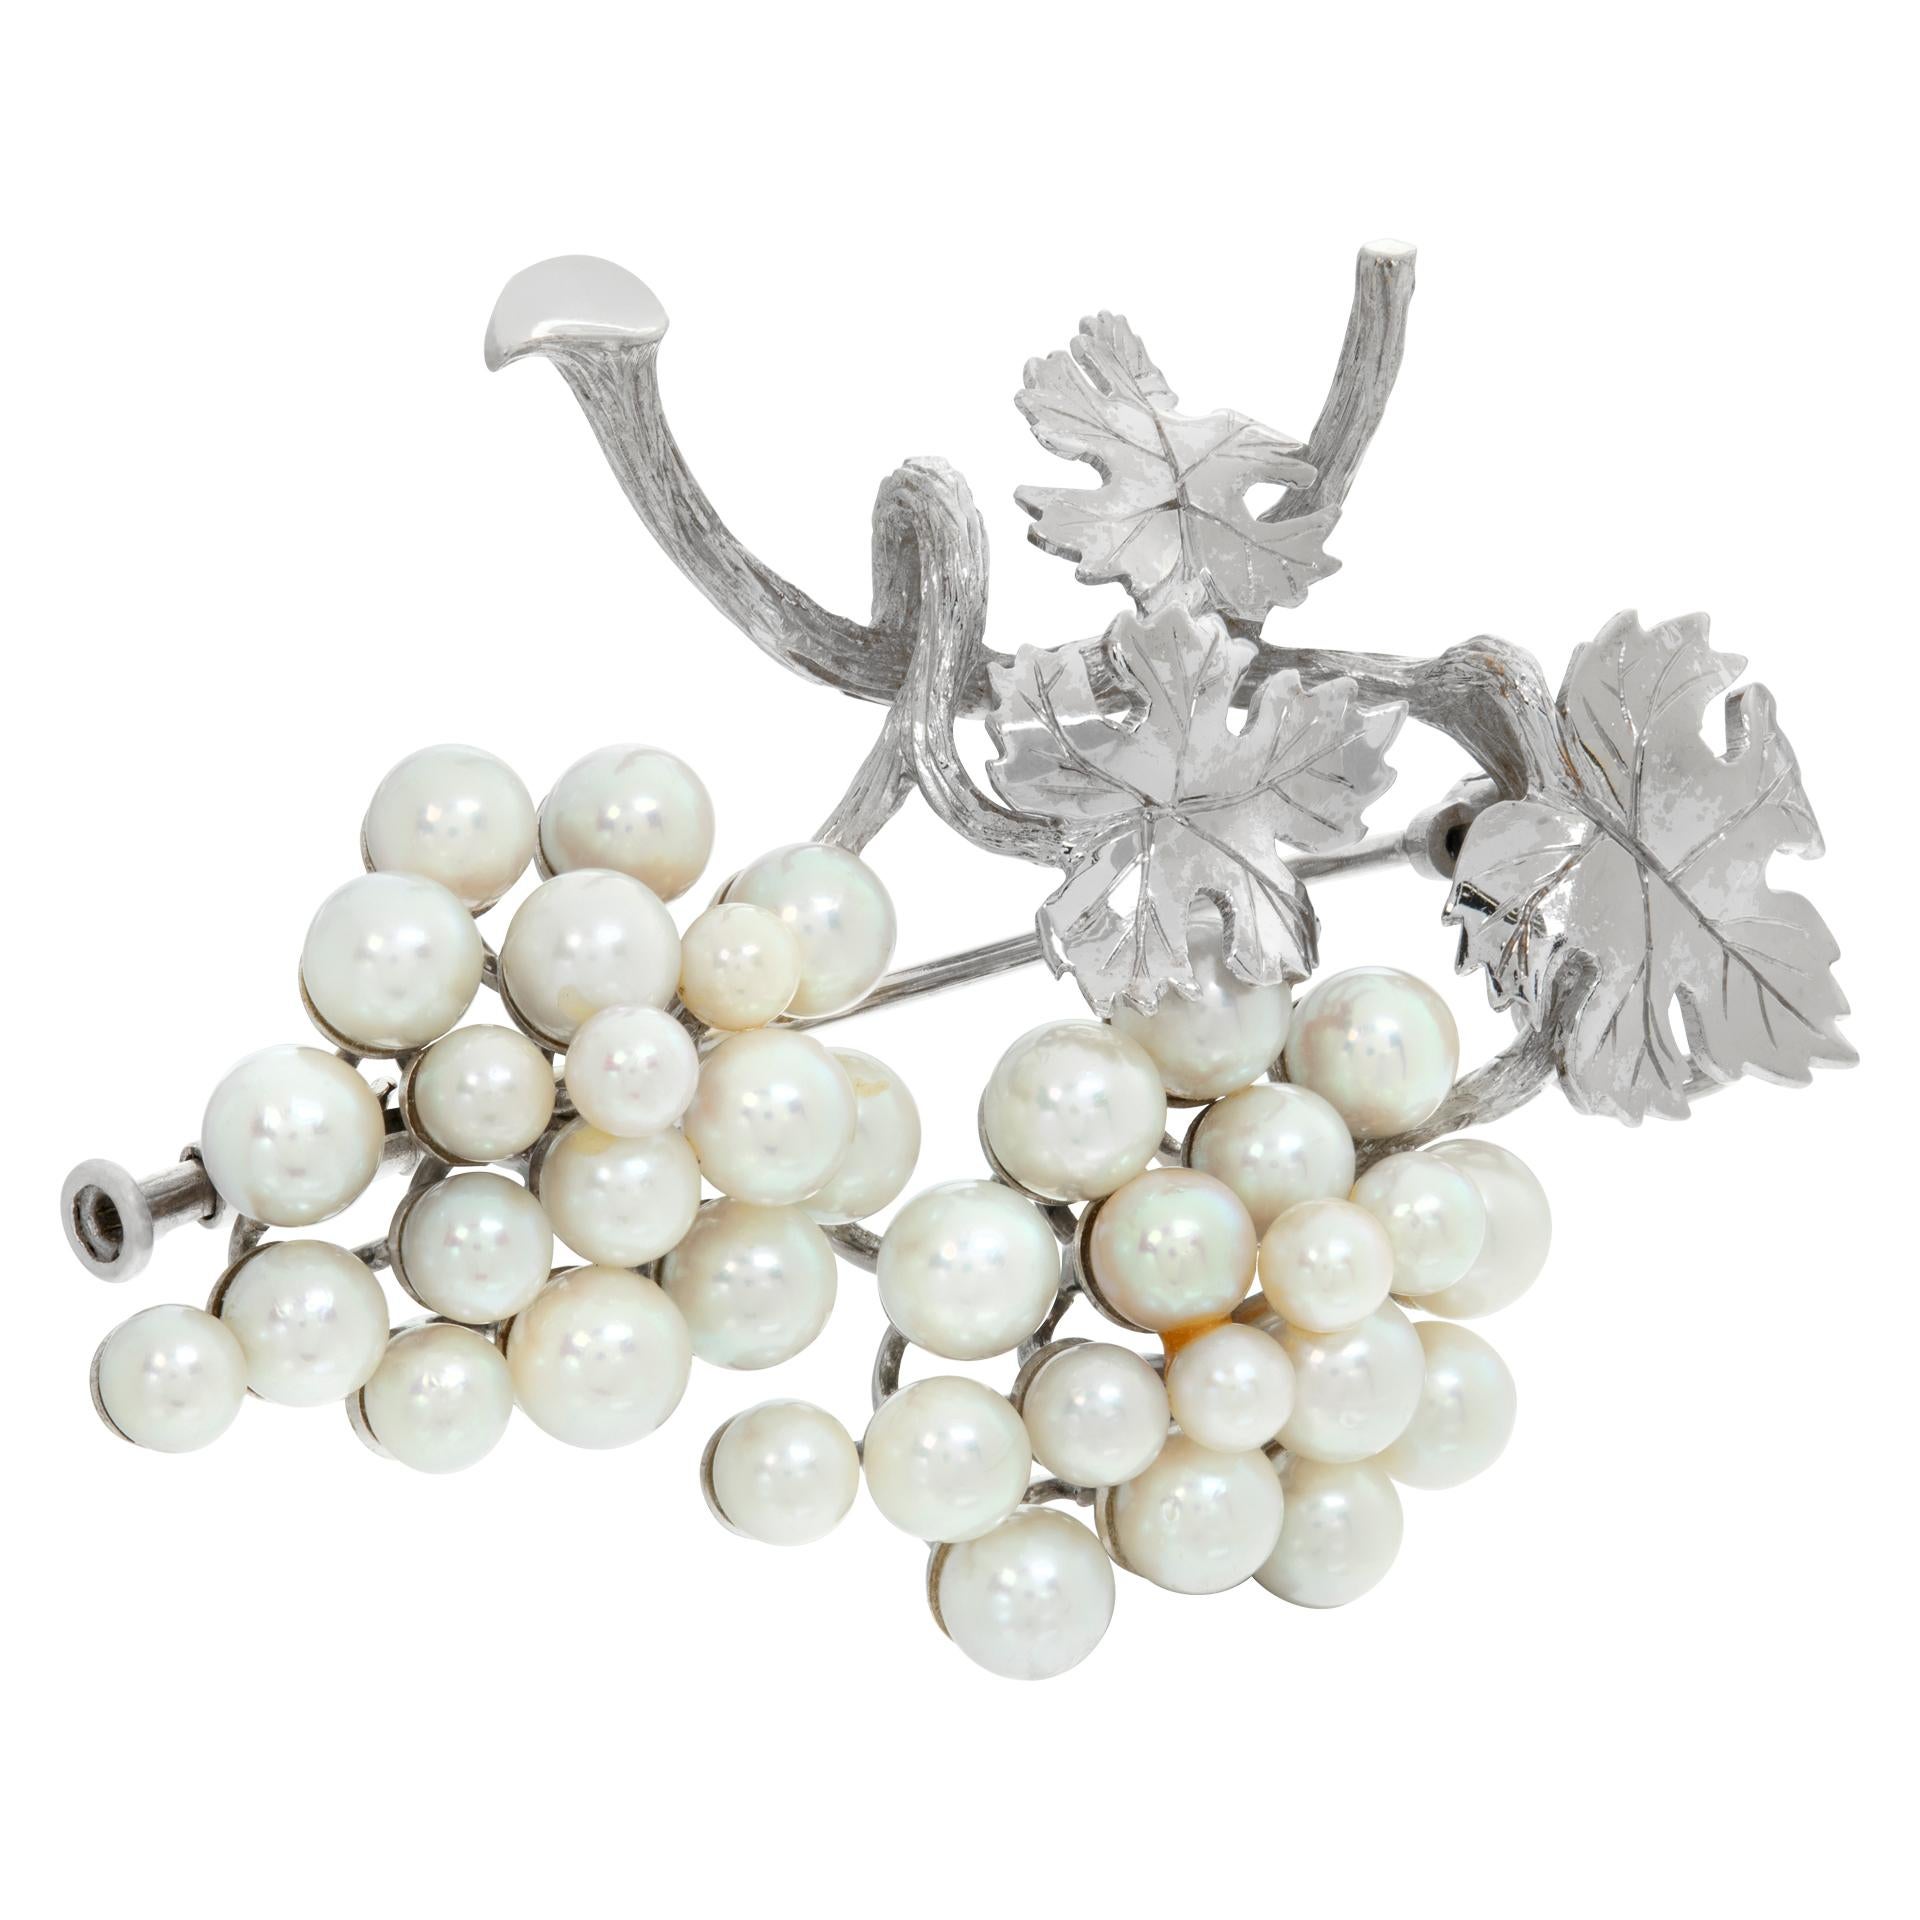 Grape vine design pearl brooch in 18k white gold. Measures 2 inches by 1.5 inches, pearl diameters 3mm - 5mm.